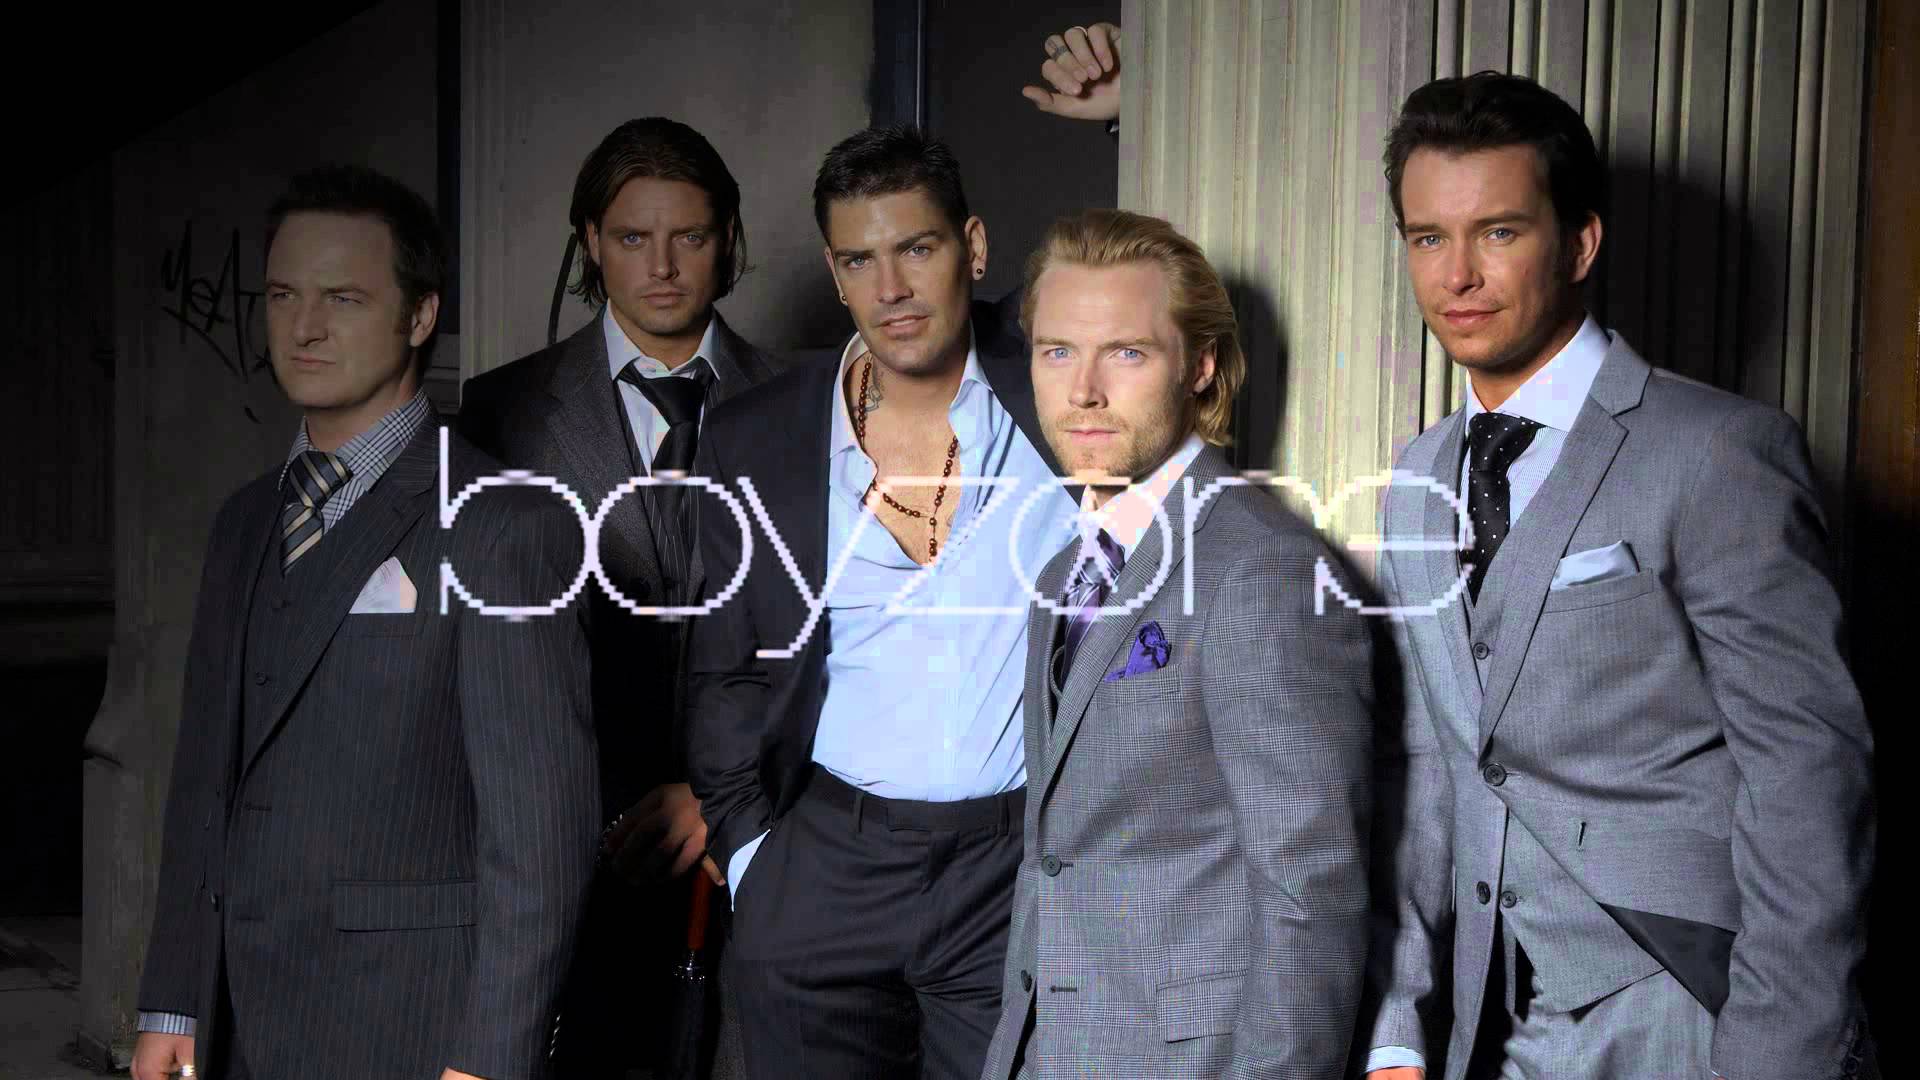 BOYZONE - NON STOP LOVE SONGS FOR YOU - YouTube